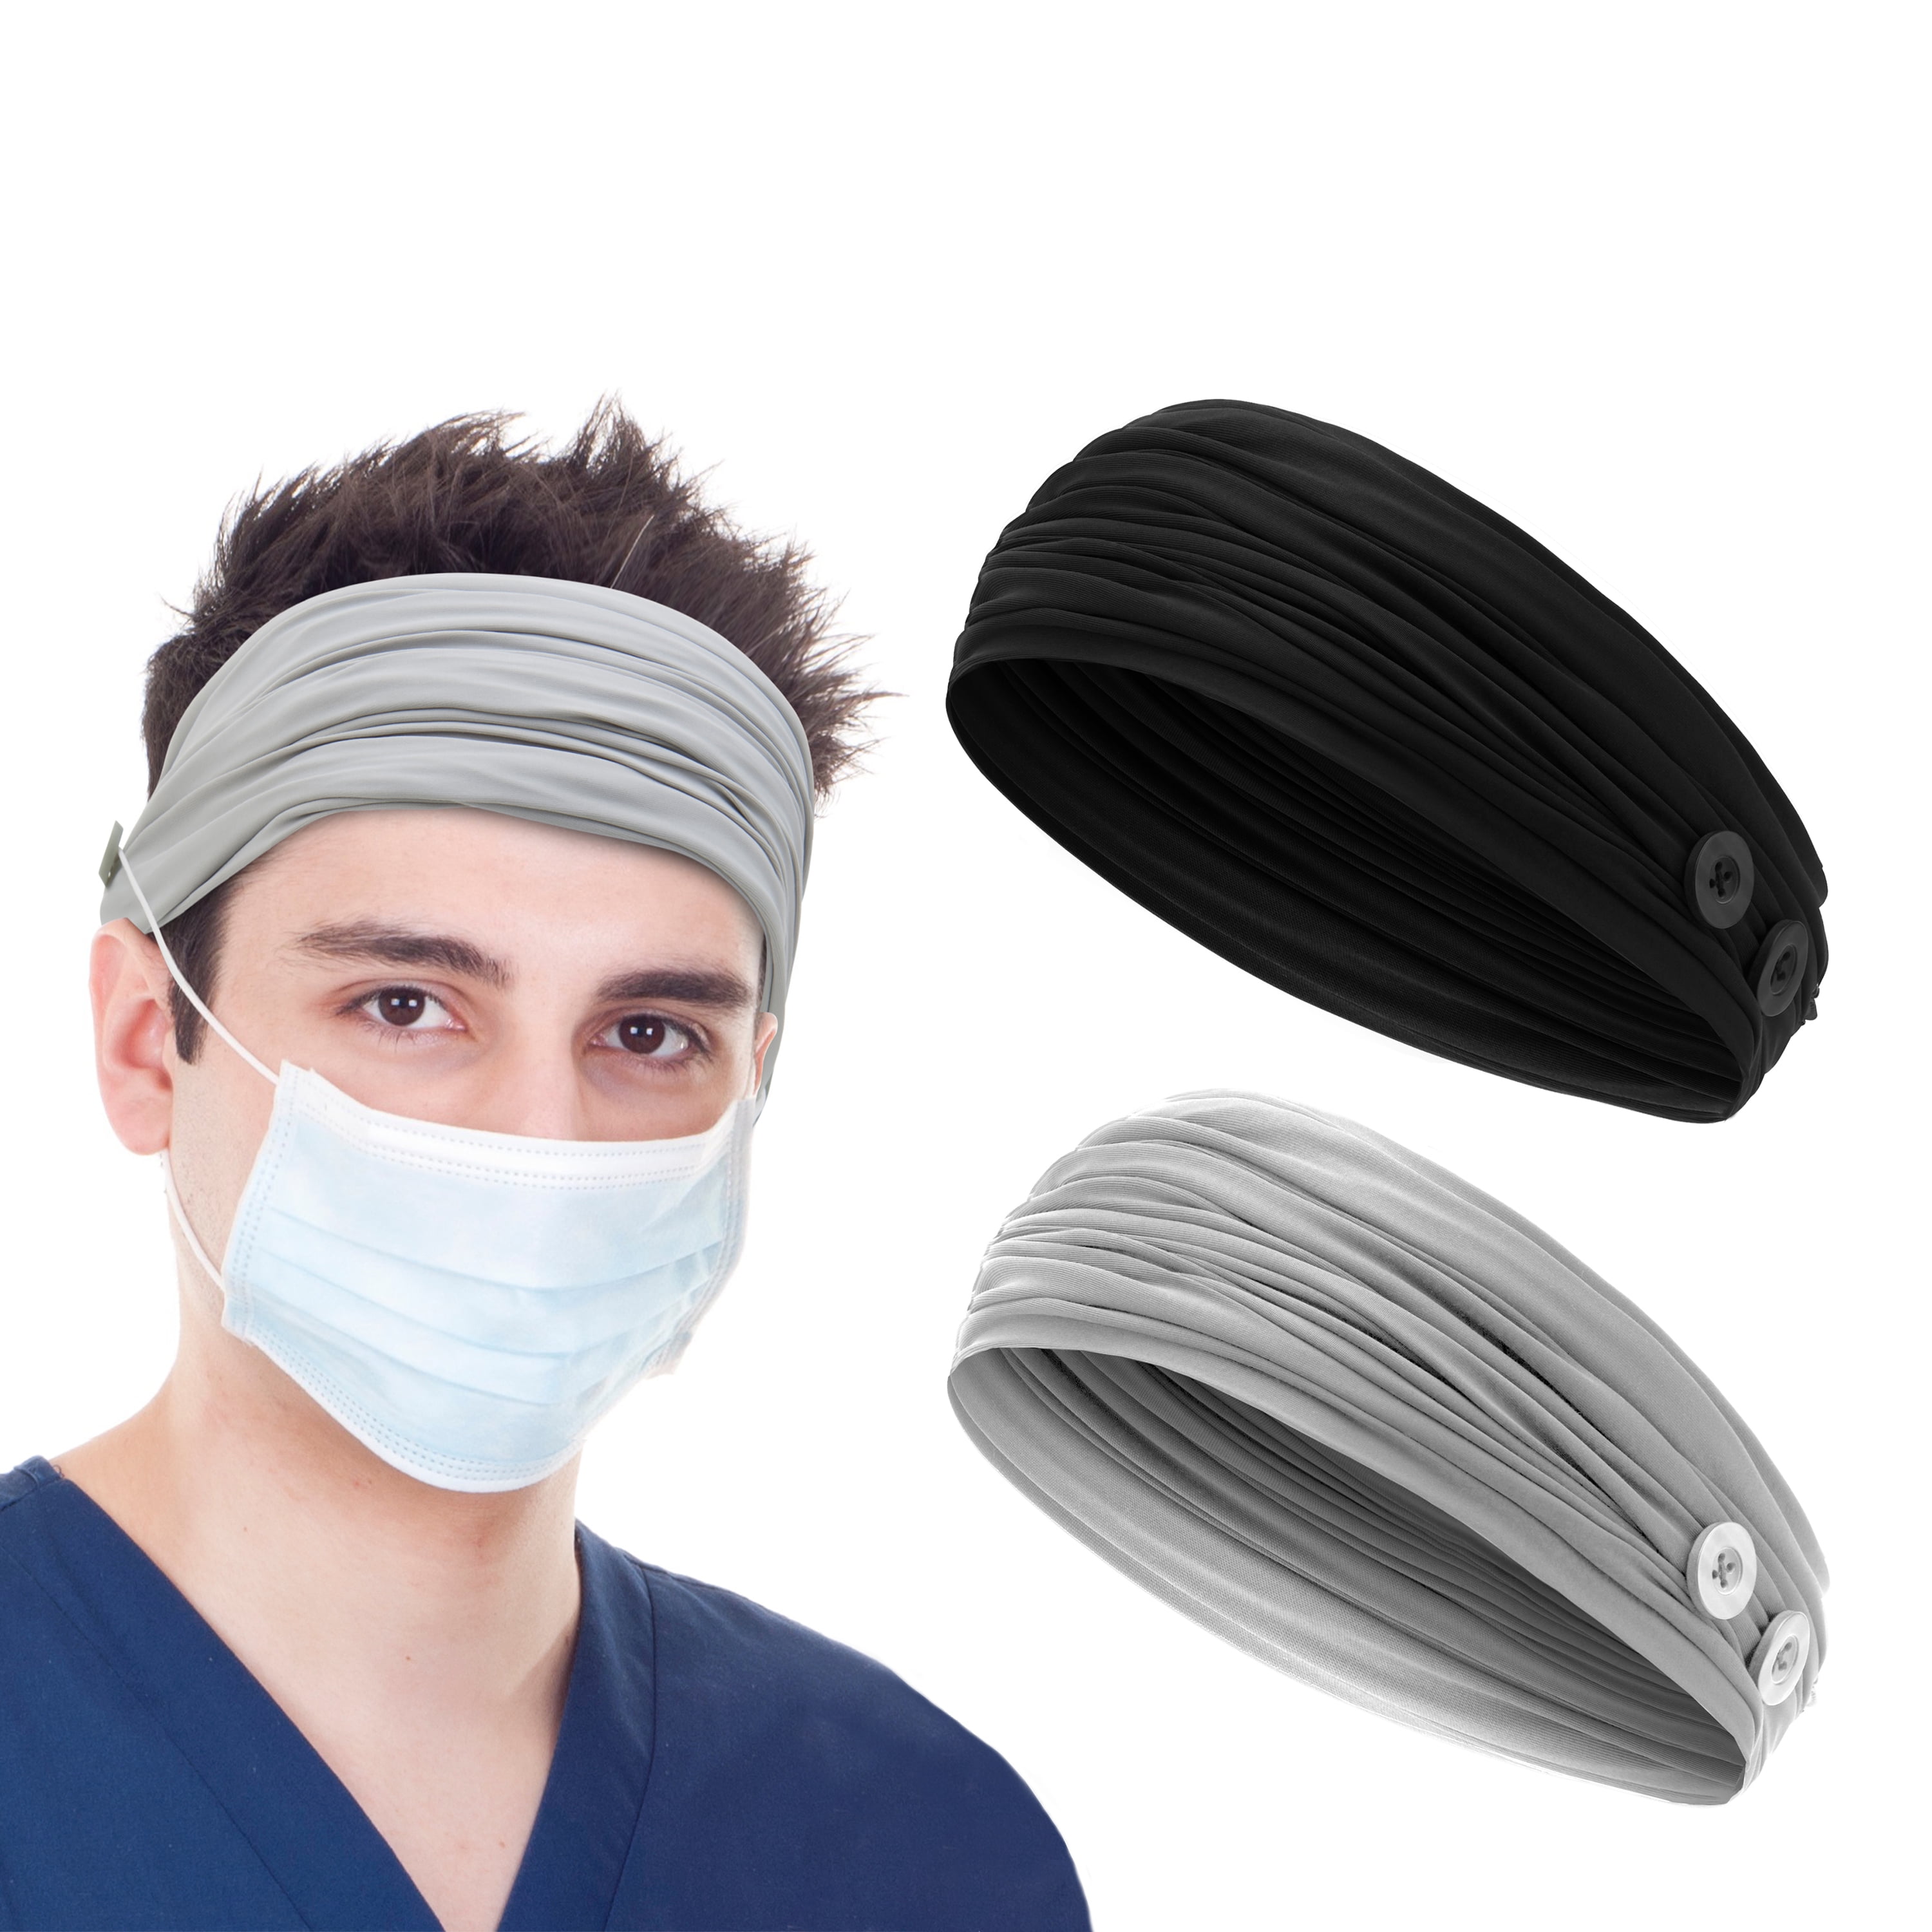 No Slip Headbands with Buttons for Nurses,Stretchy Sweat Wicking Button Headband for Holding Face Cover,Protect Your Ears for Sport,Daily Use Blue 